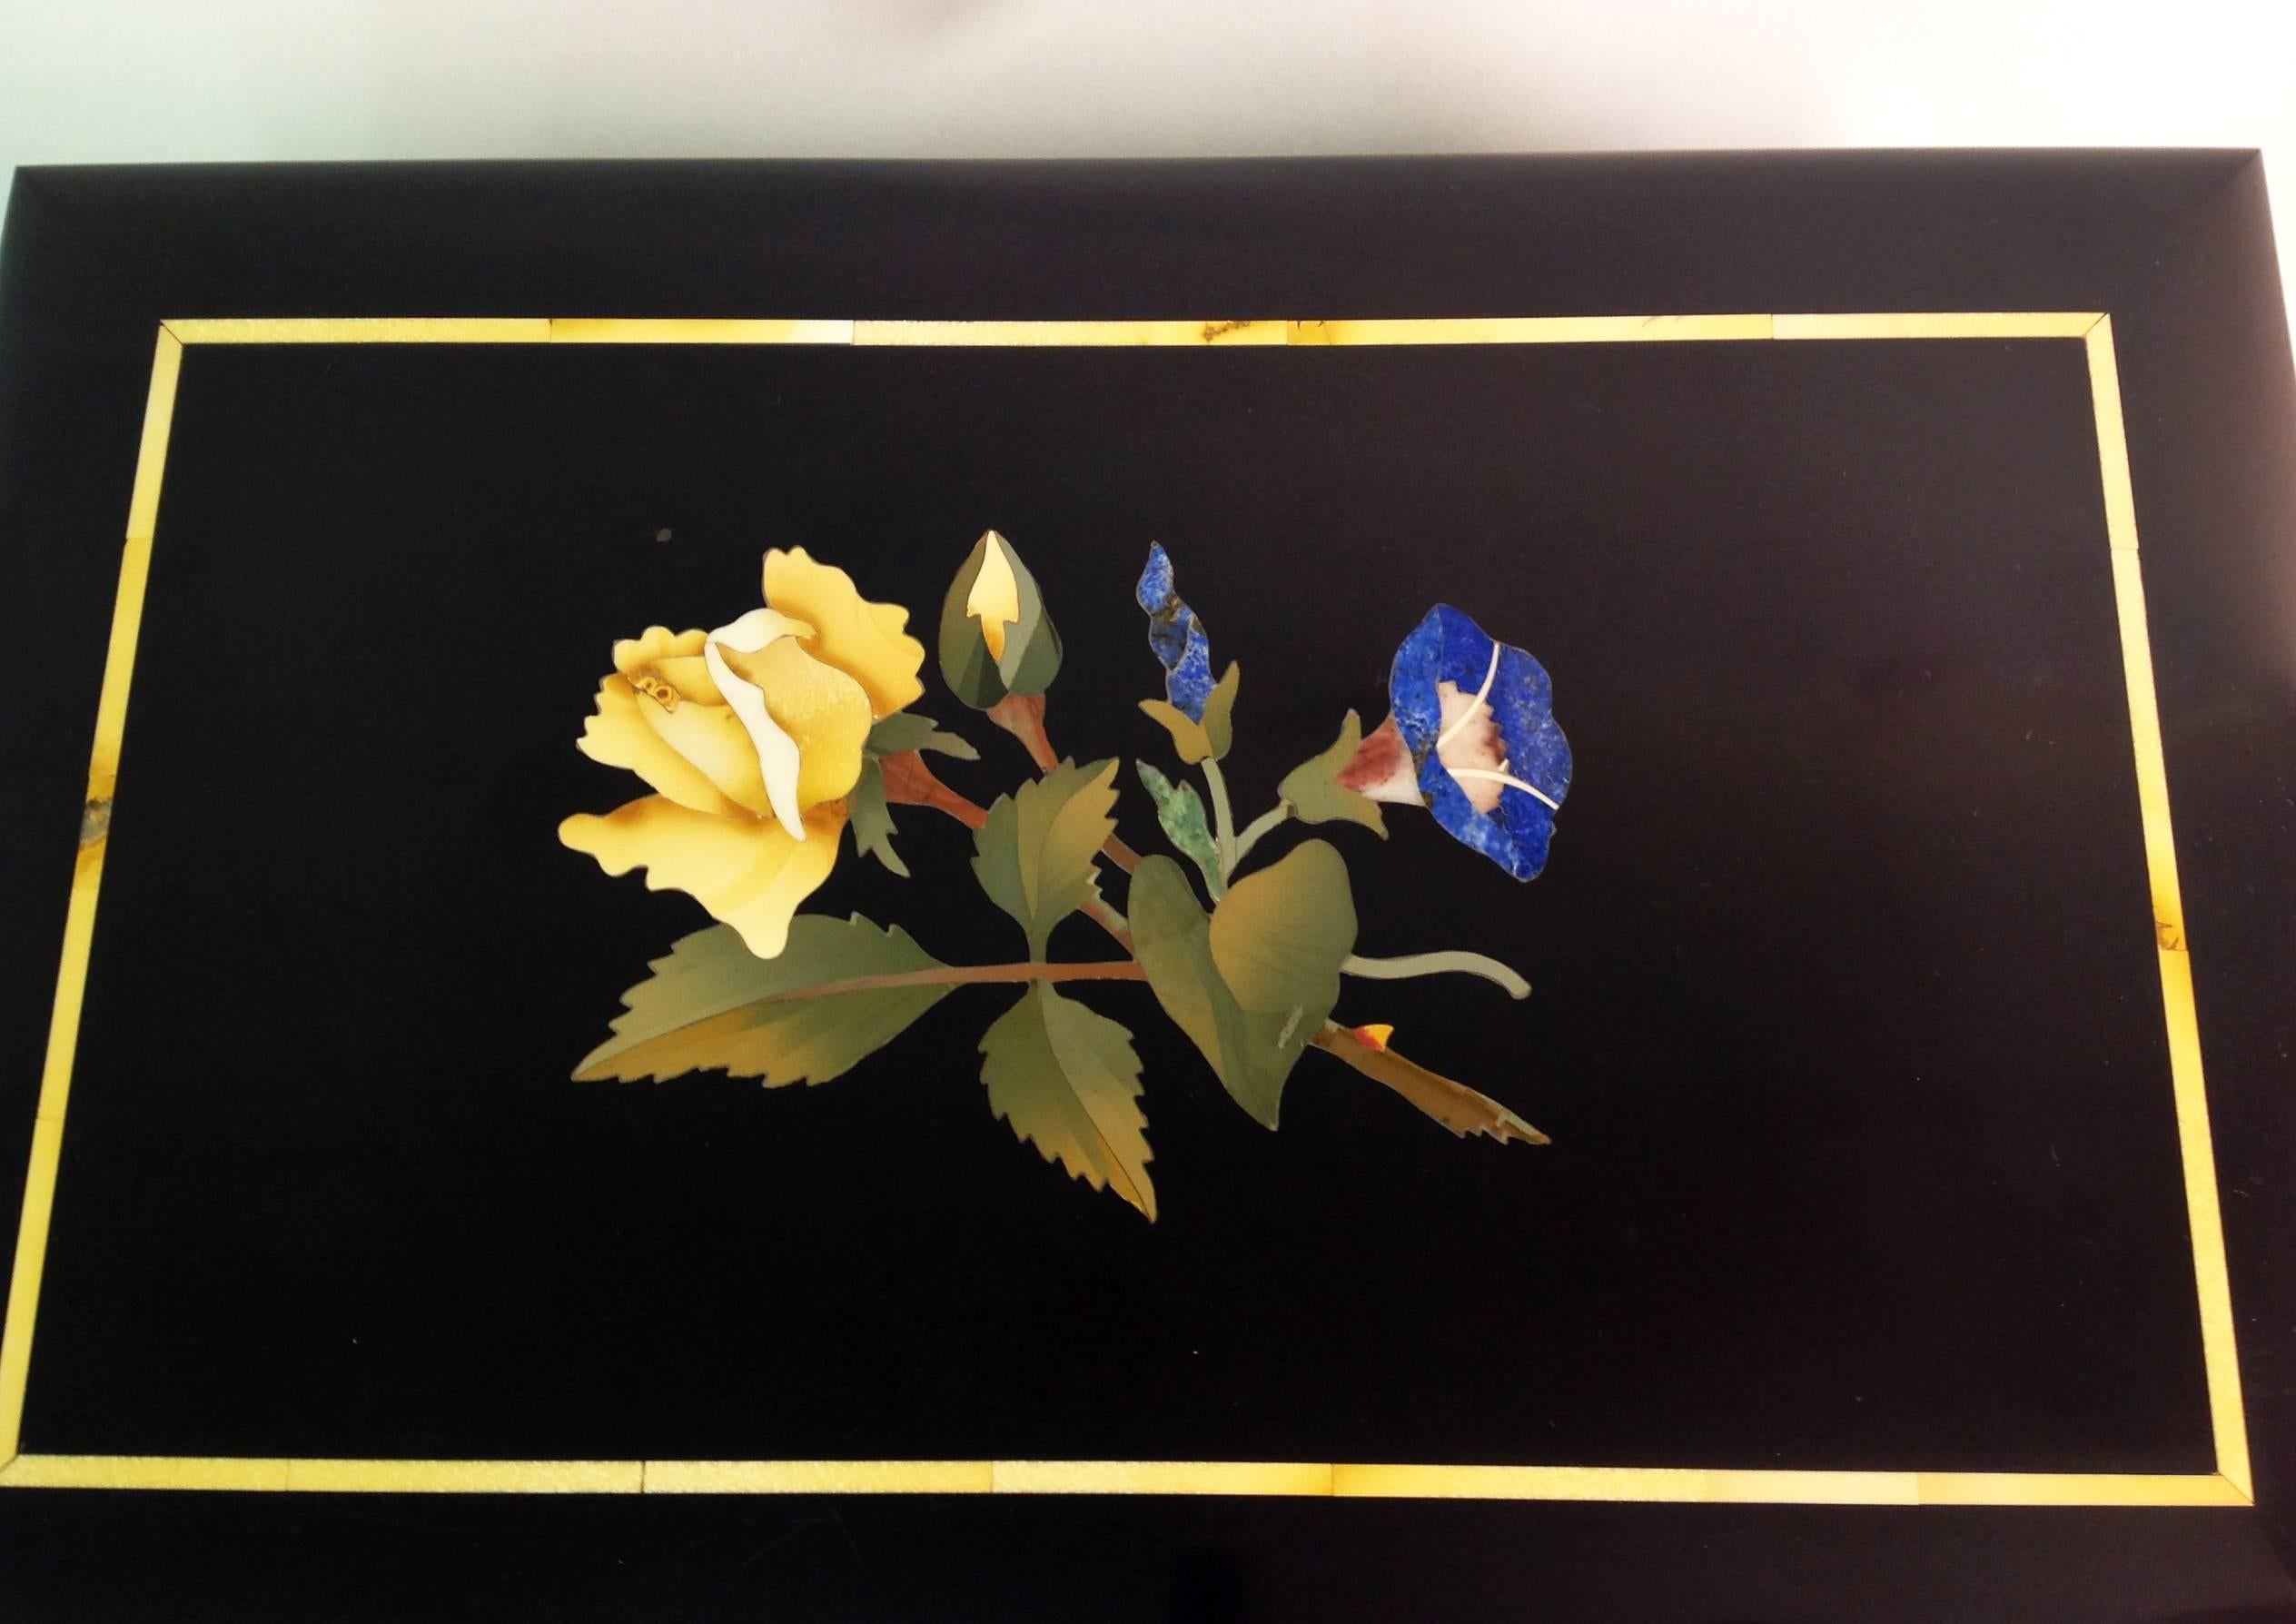 An elegant Belgian black marble hinged box with semiprecious stone decoration of yellow and blue flowers. Cut stone with a 1/8 inch bevel about the top, connected with a brass hinge. Italian private collection. Florentine handicraft. 
Weight kg